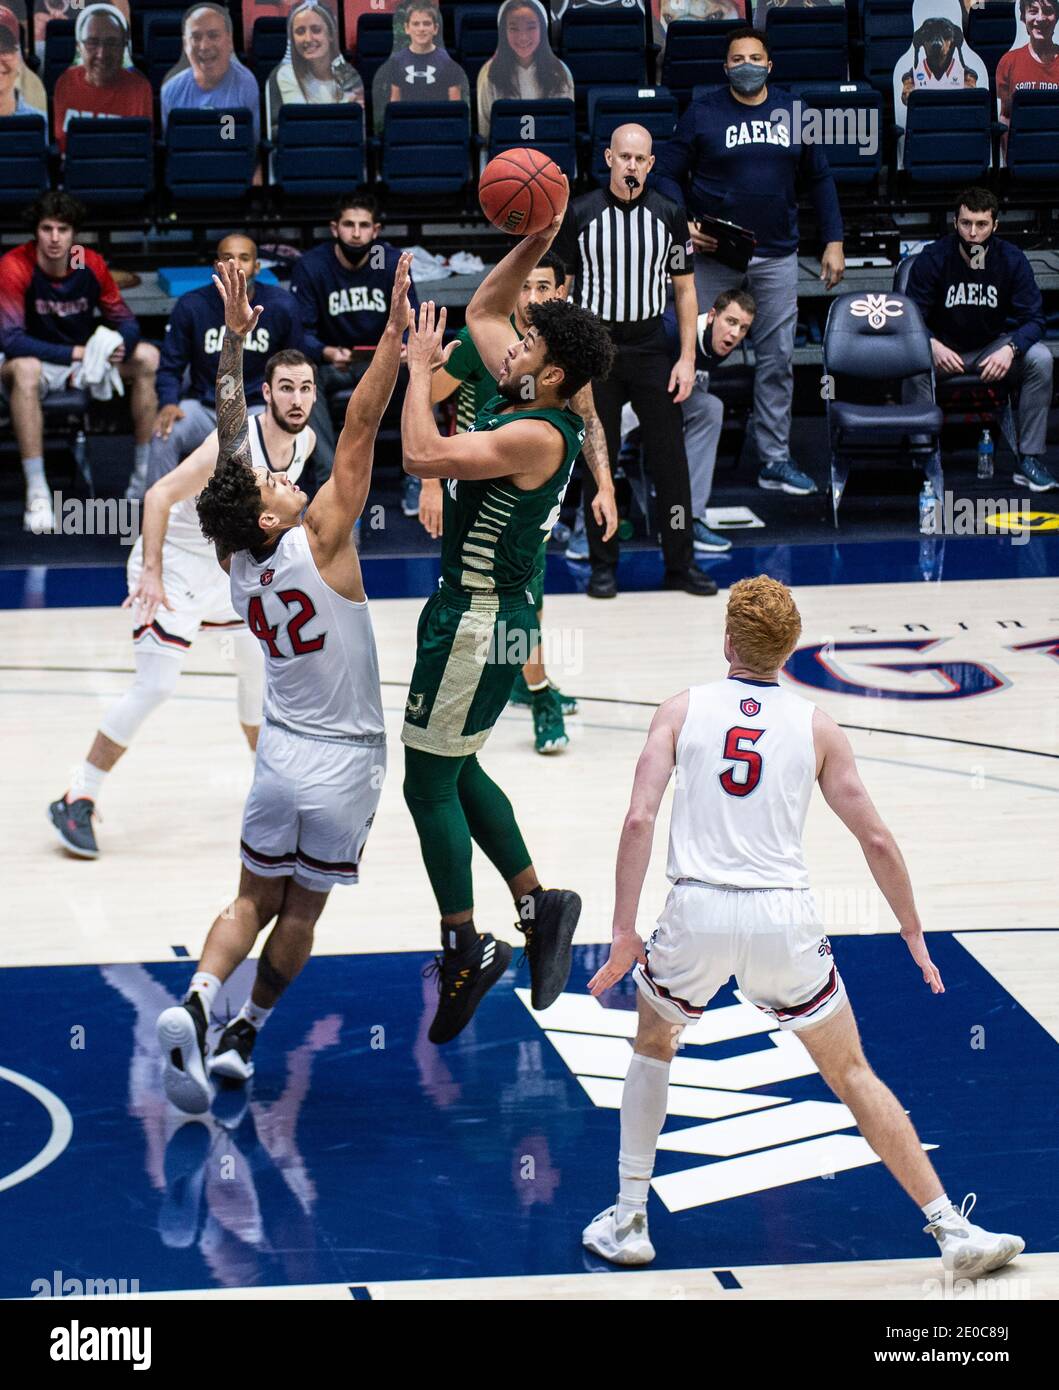 Moraga, CA U.S. 30th Dec, 2020. A. Sacramento State Hornets forward Ethan Esposito (22) takes a shot at the top of the key during the NCAA Men's Basketball game between Sacramento State Hornets and the Saint Mary's Gaels 45-63 lost at McKeon Pavilion Moraga Calif. Thurman James/CSM/Alamy Live News Stock Photo